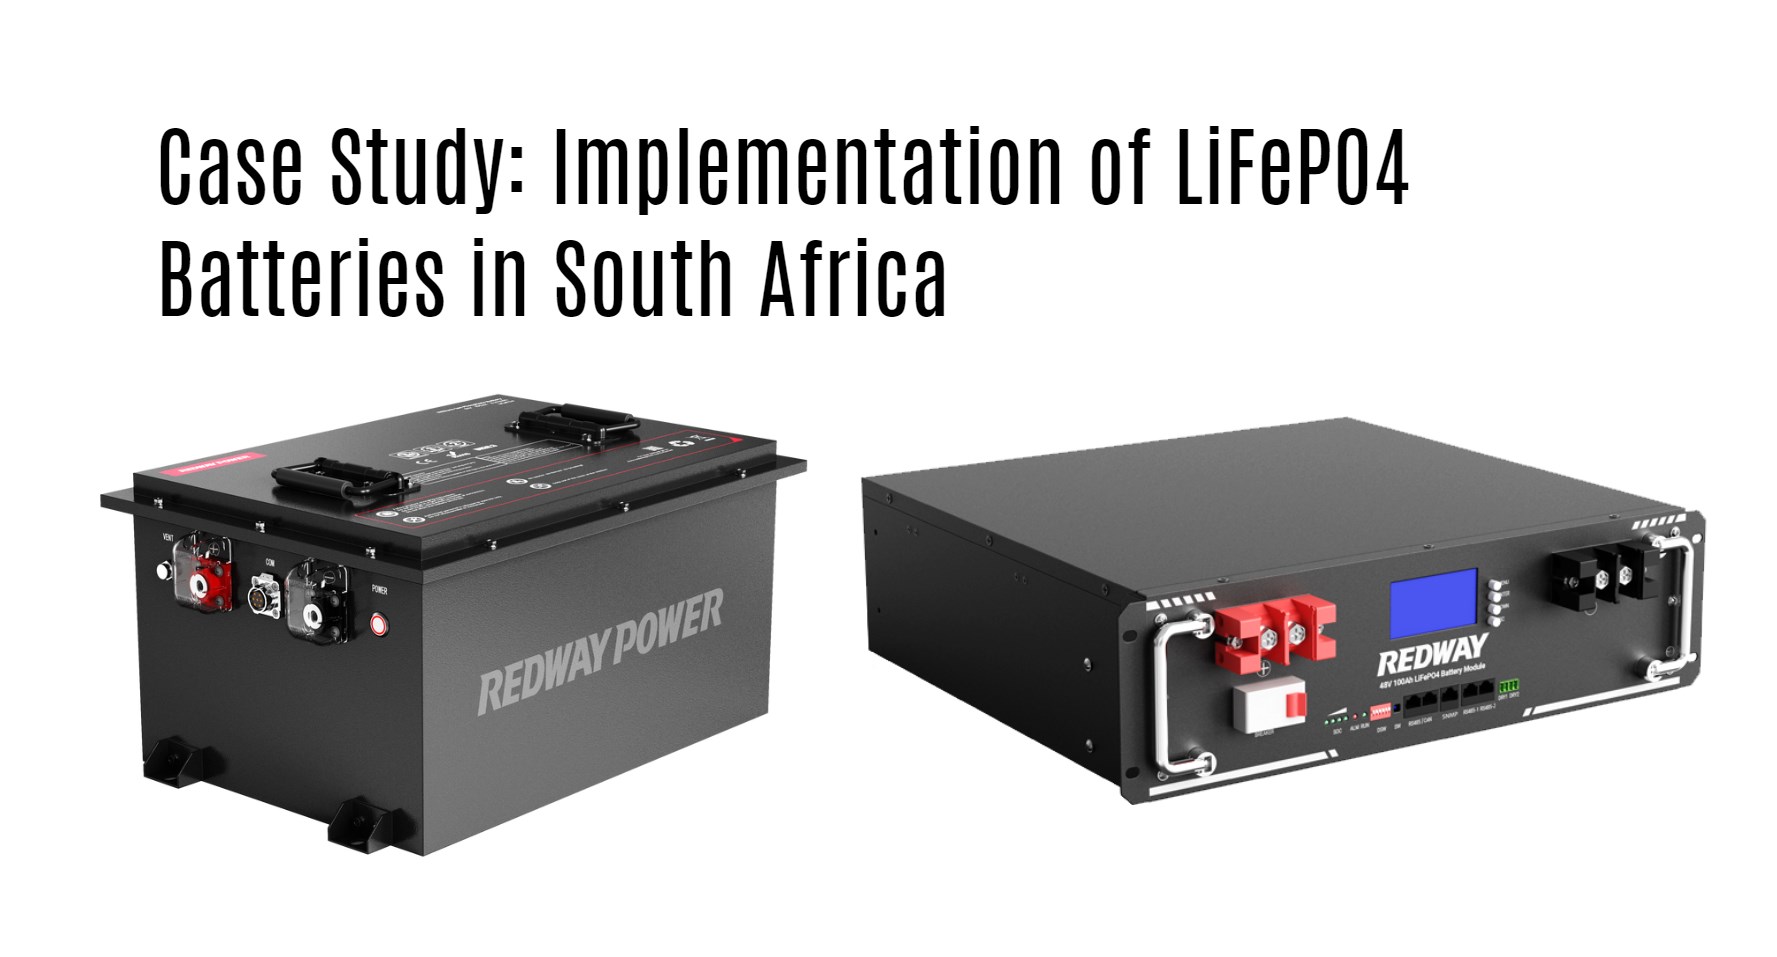 Case Study: Implementation of LiFePO4 Batteries in South Africa